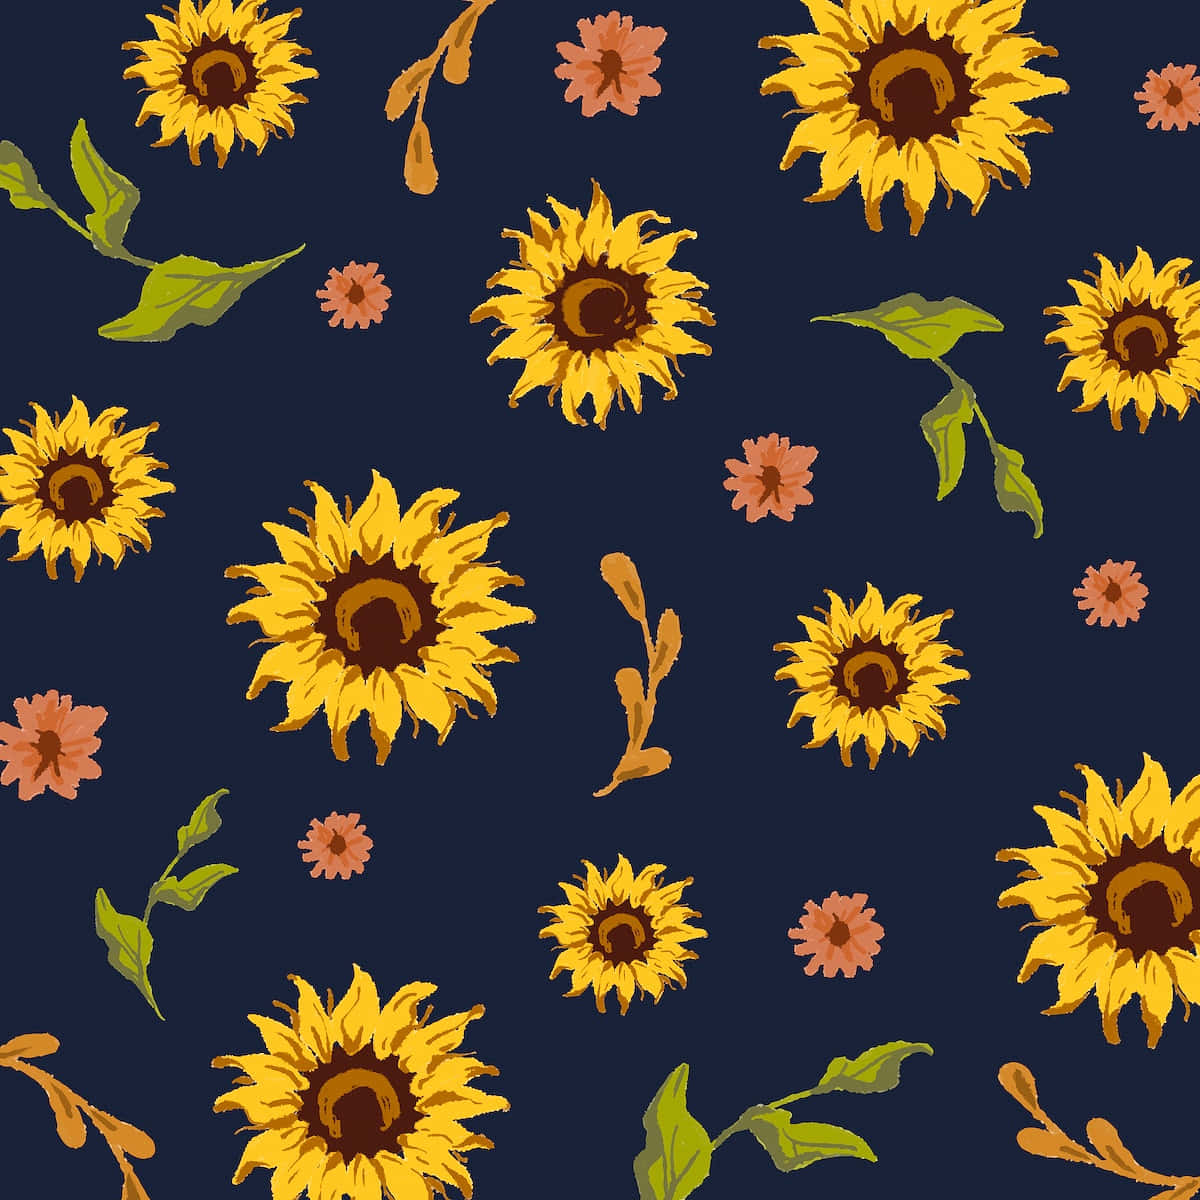 download-sunflowers-pictures-1200-x-1200-wallpapers